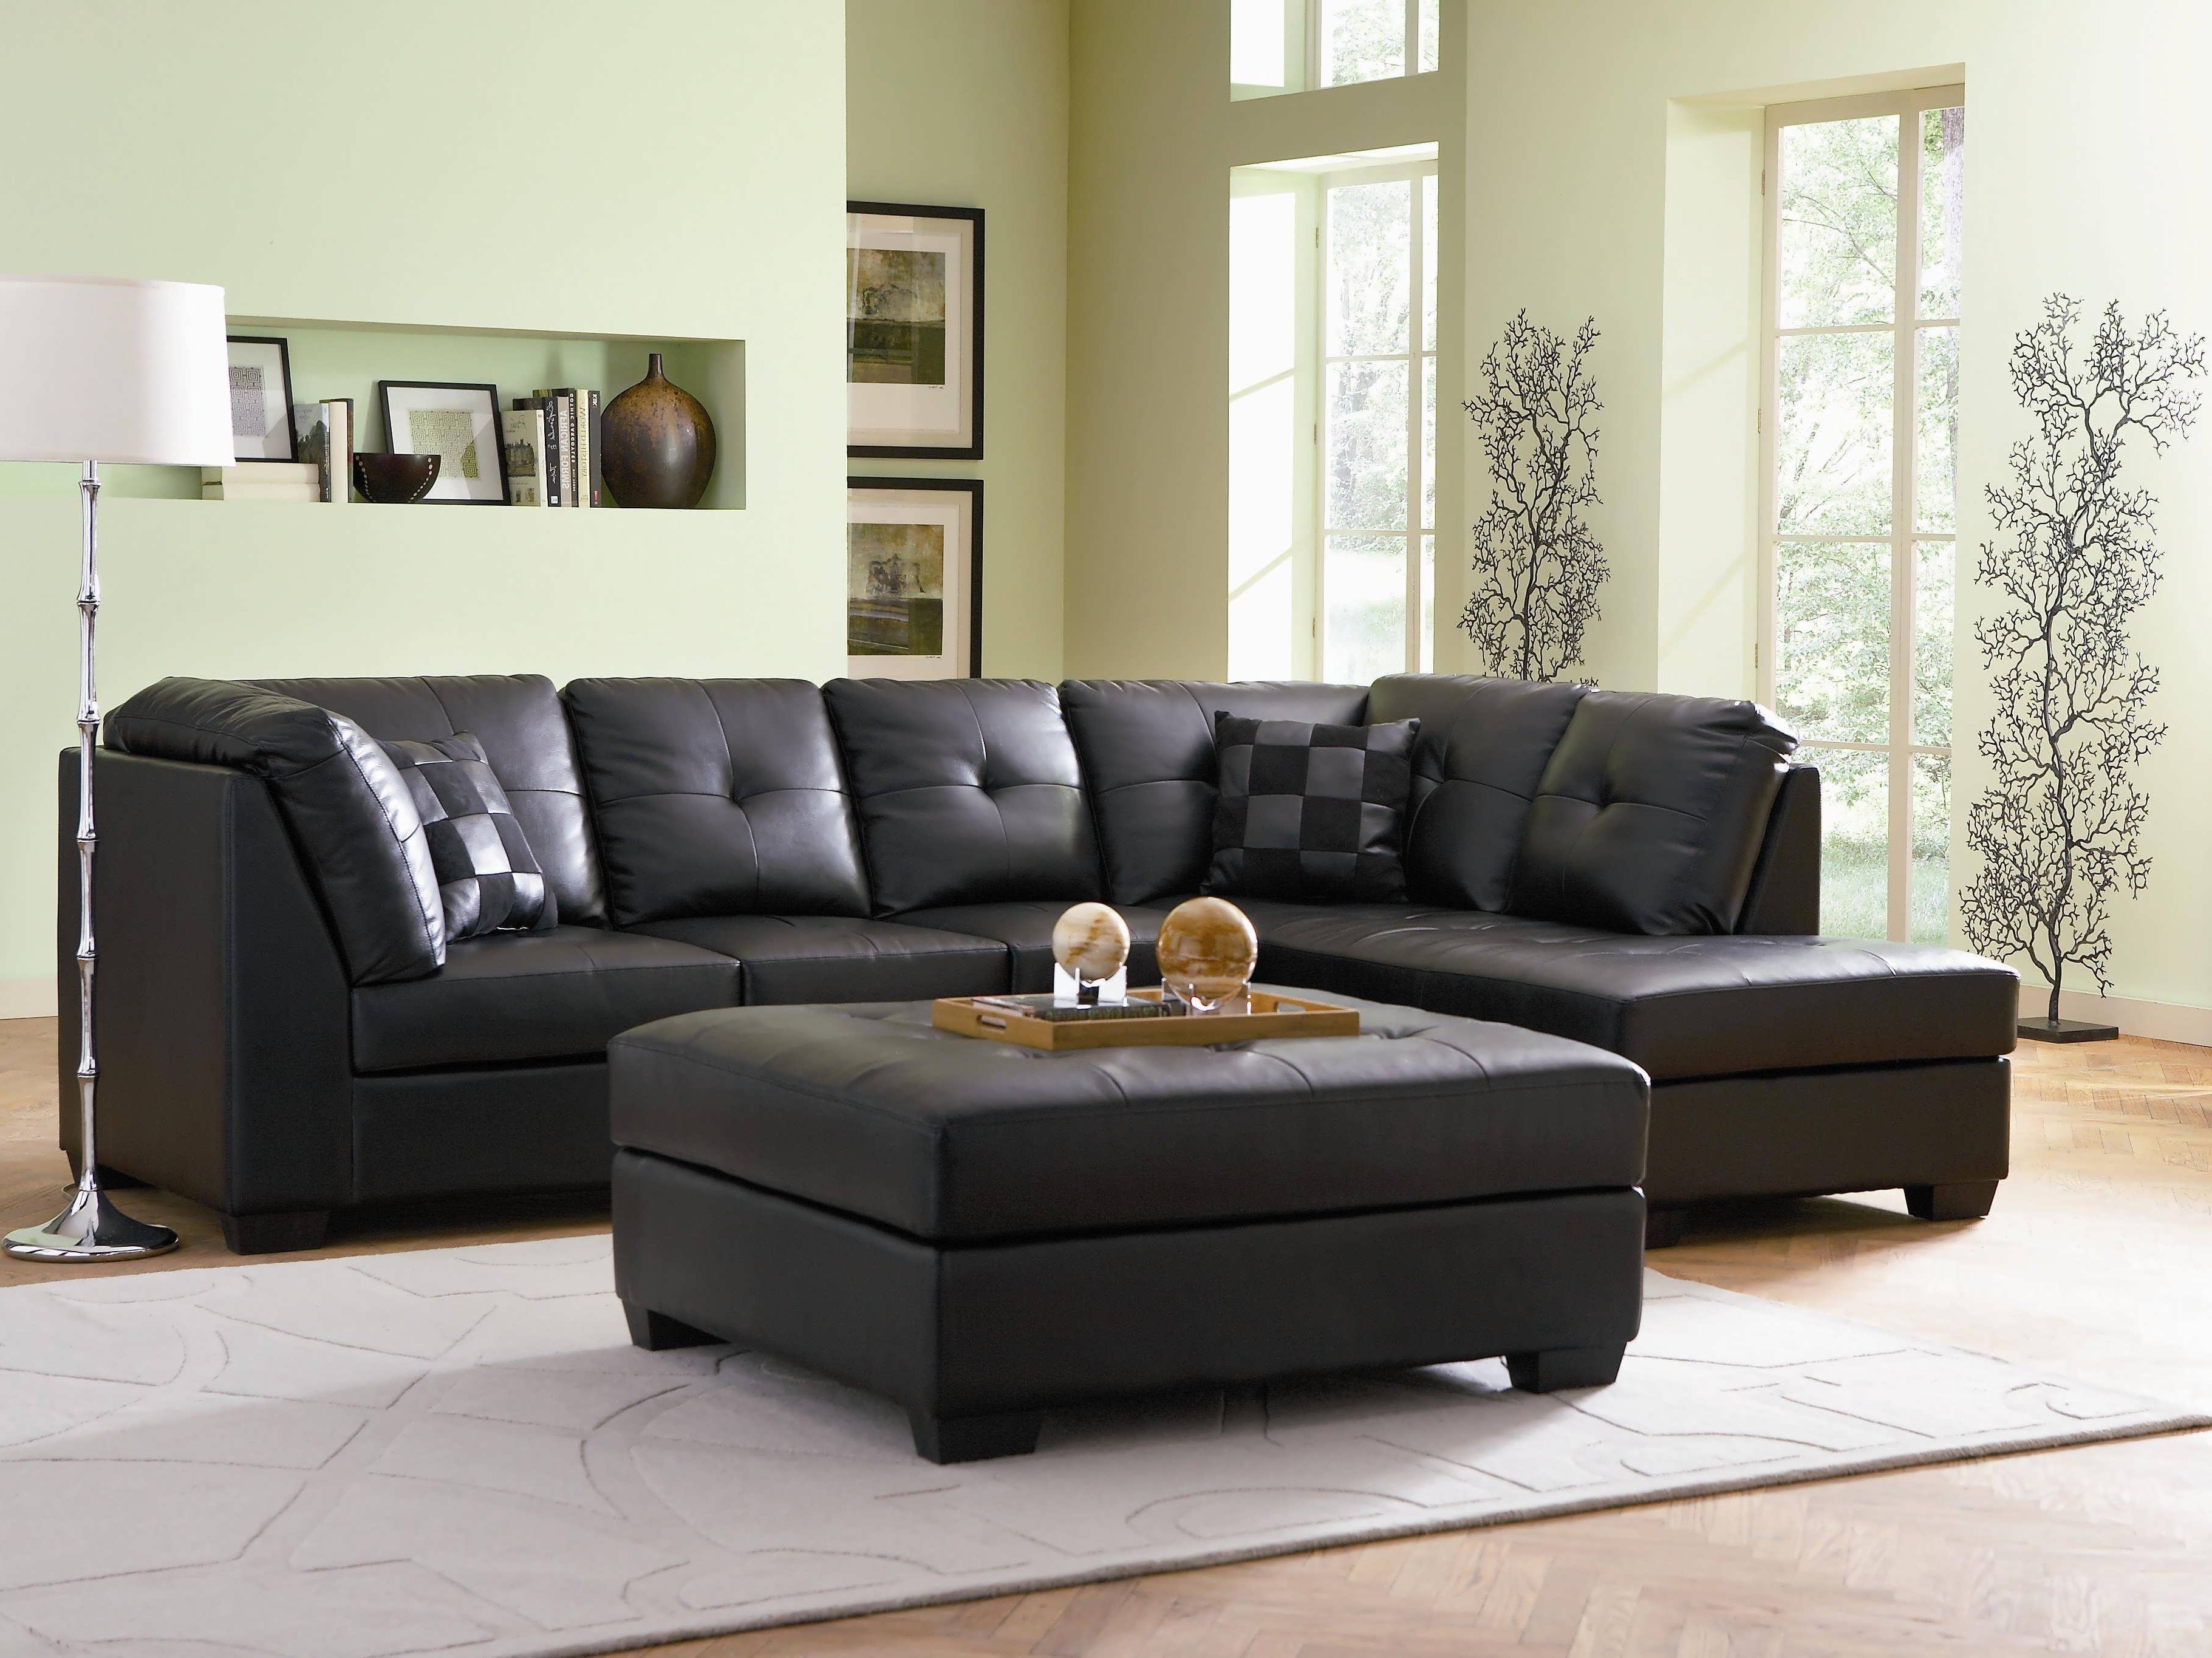 Black Leather Sectionals With Chaise Within Widely Used Sofa : Chaise Sofa Cream Leather Sofa Black Sectional Sofa With (View 14 of 15)